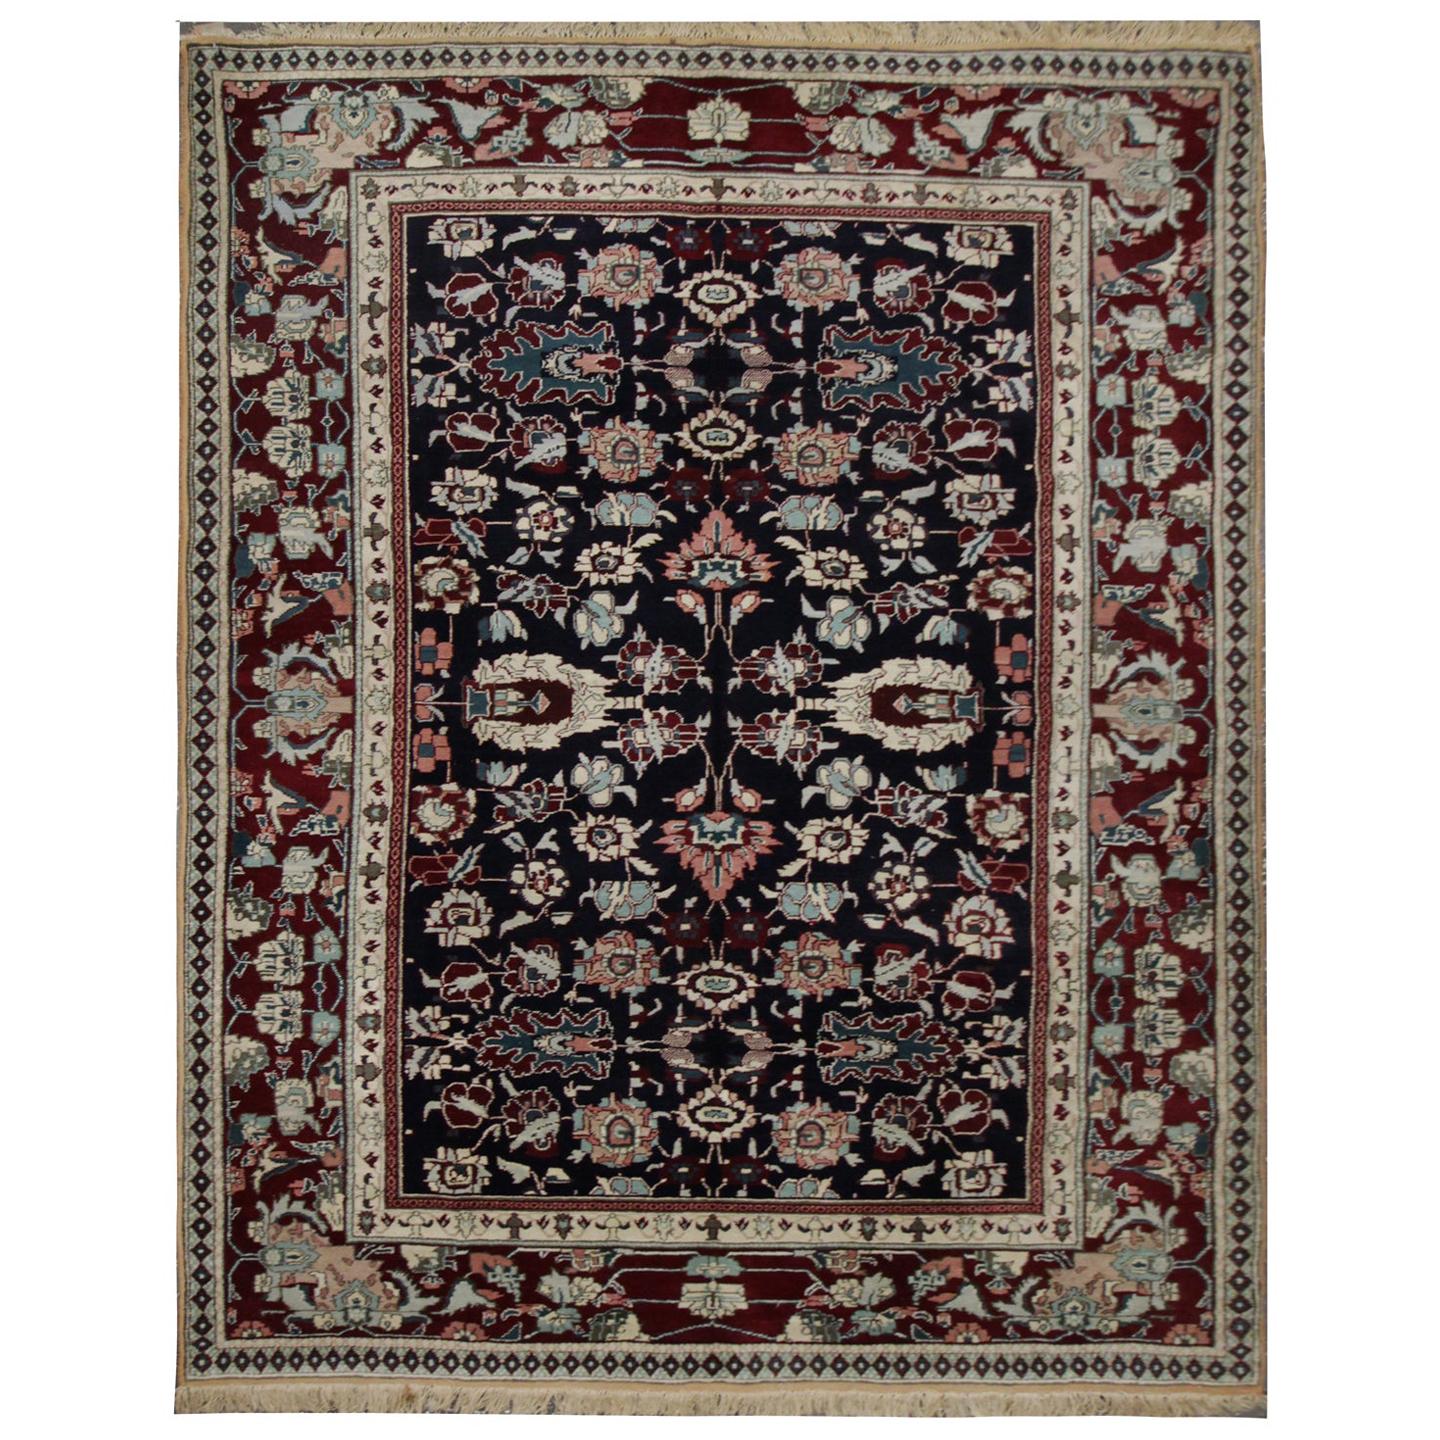 Handmade Carpet Antique Rugs Indian Traditional Red black Wool Rug For Sale